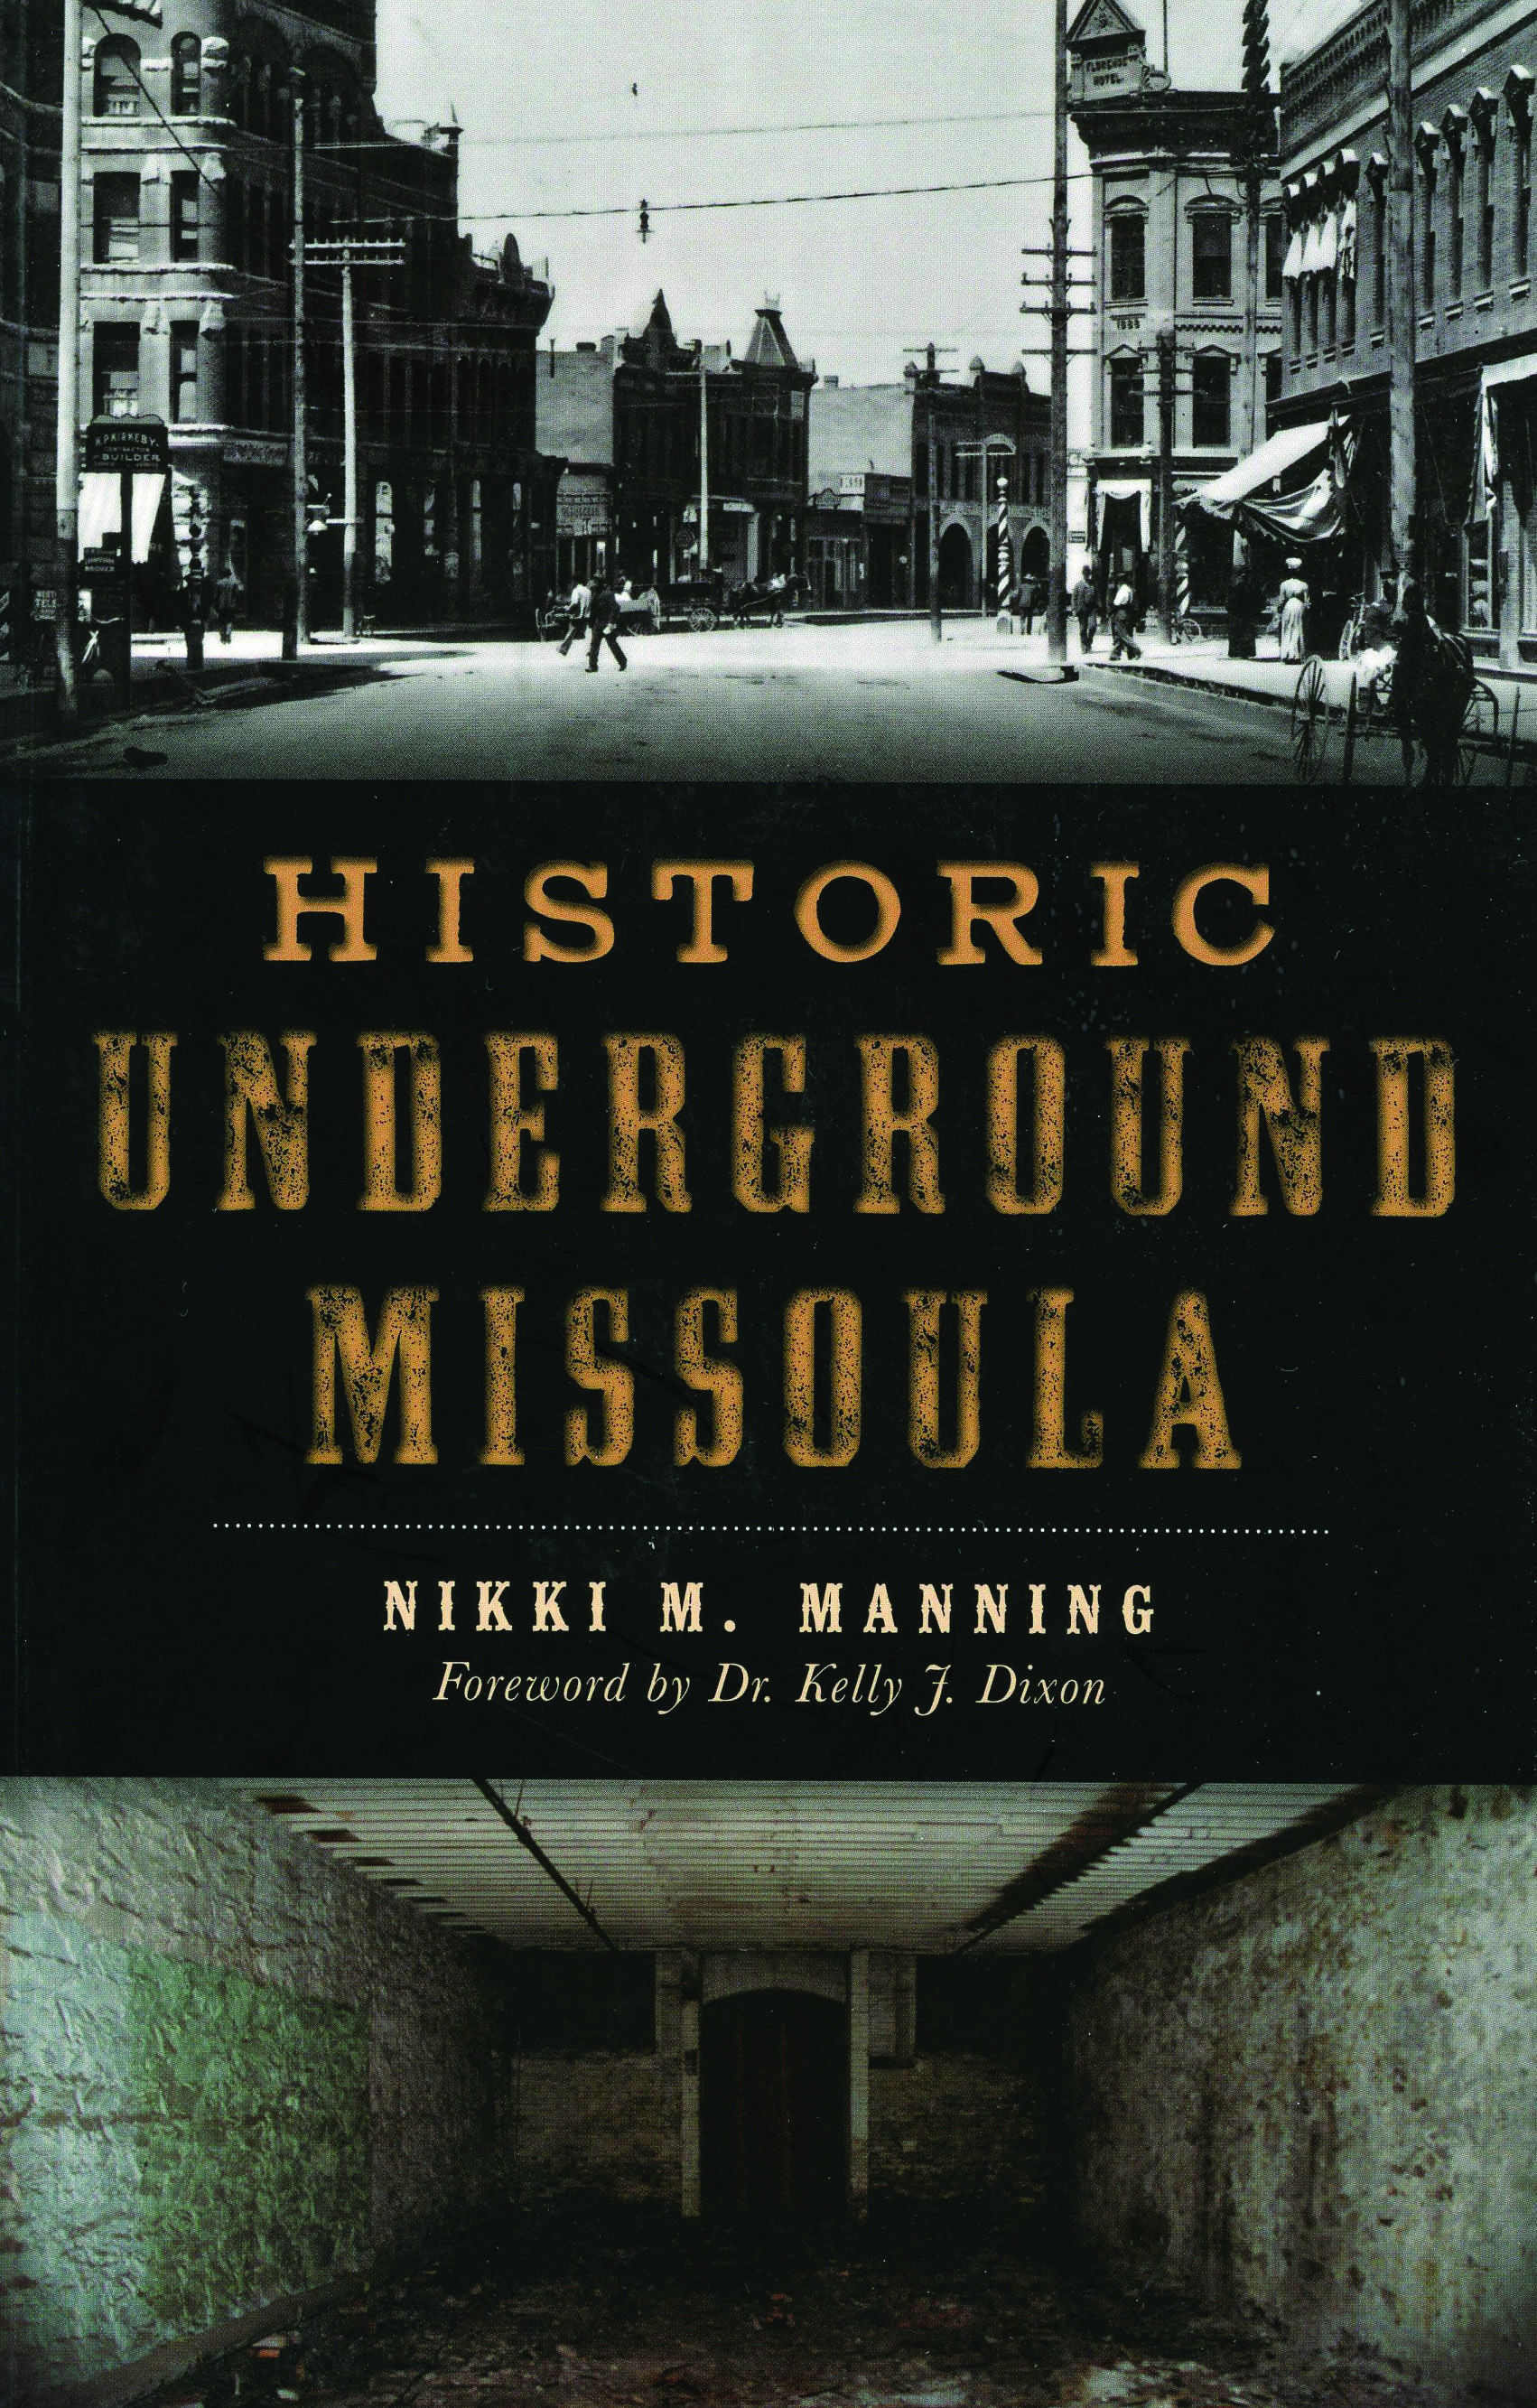 Find out what lies under Missoula’s streets